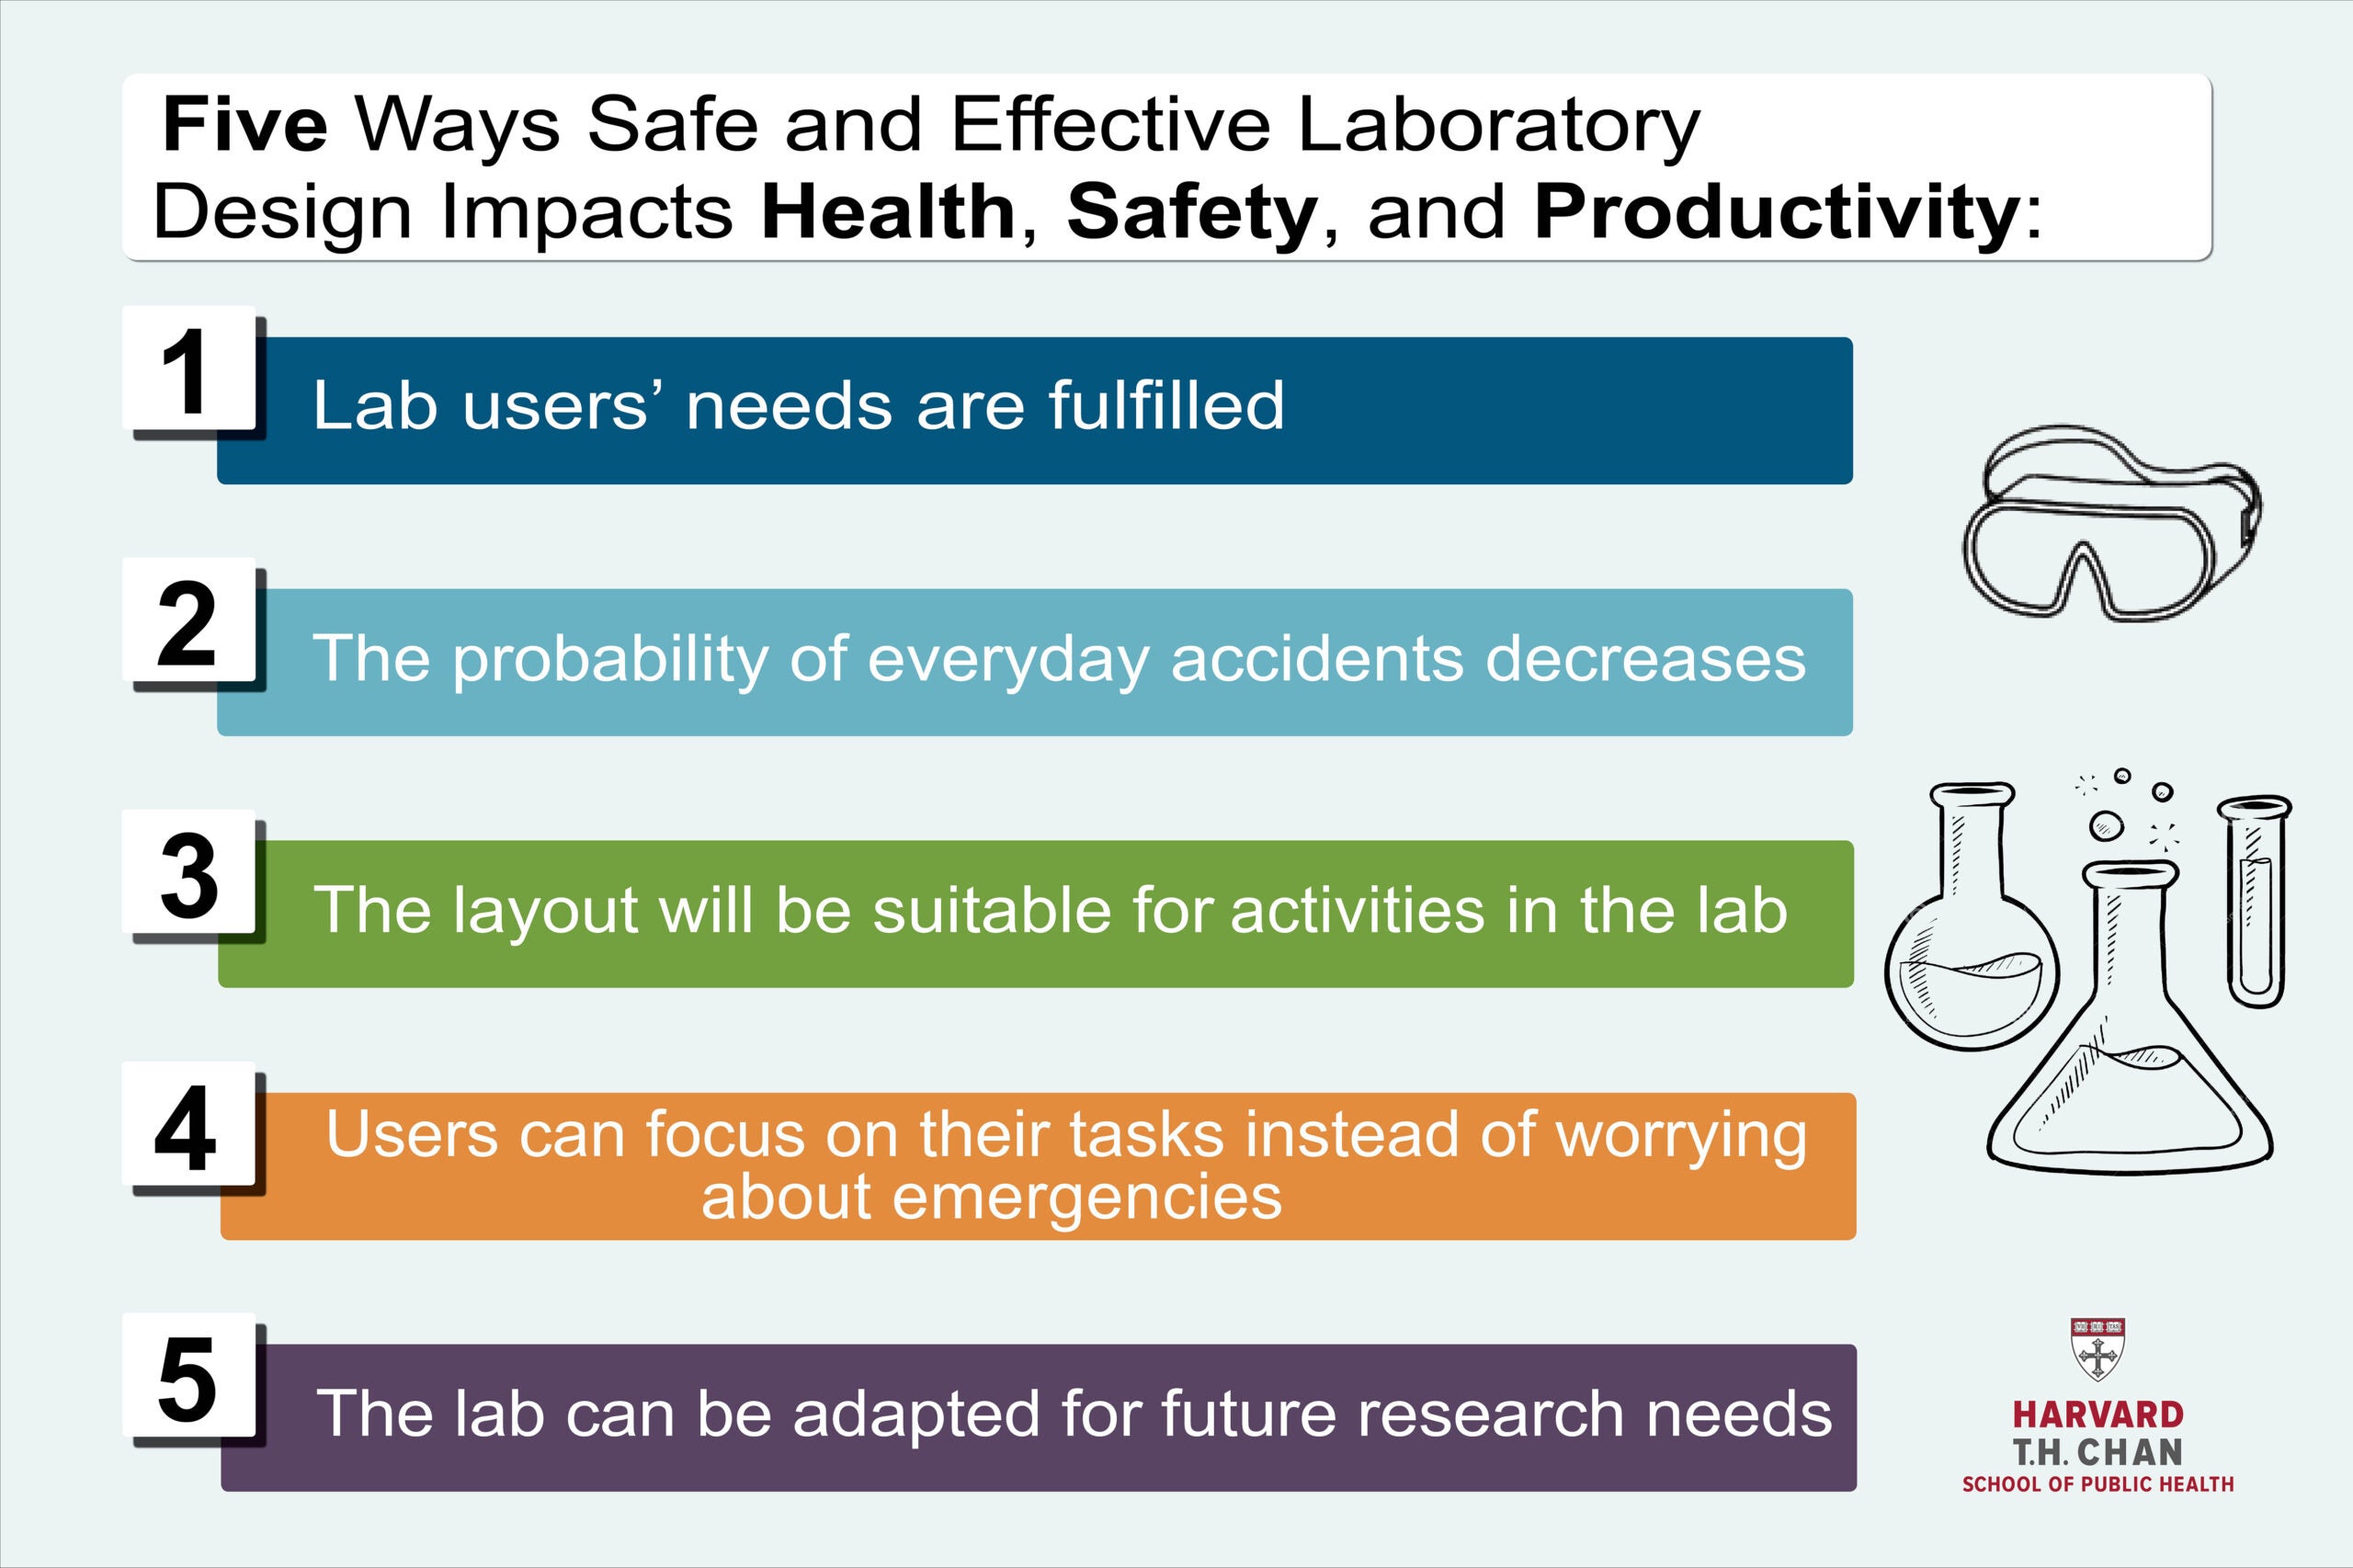 Five Ways Effective Laboratory Design Impacts Health, Safety, and Productivity 1. Lab users’ needs are fulfilled 2. The probability of everyday accidents decreases 3. The layout will be suitable for activities in the lab 4. Users can focus on their tasks instead of worrying about emergencies 5. The lab can be adapted for future research needs